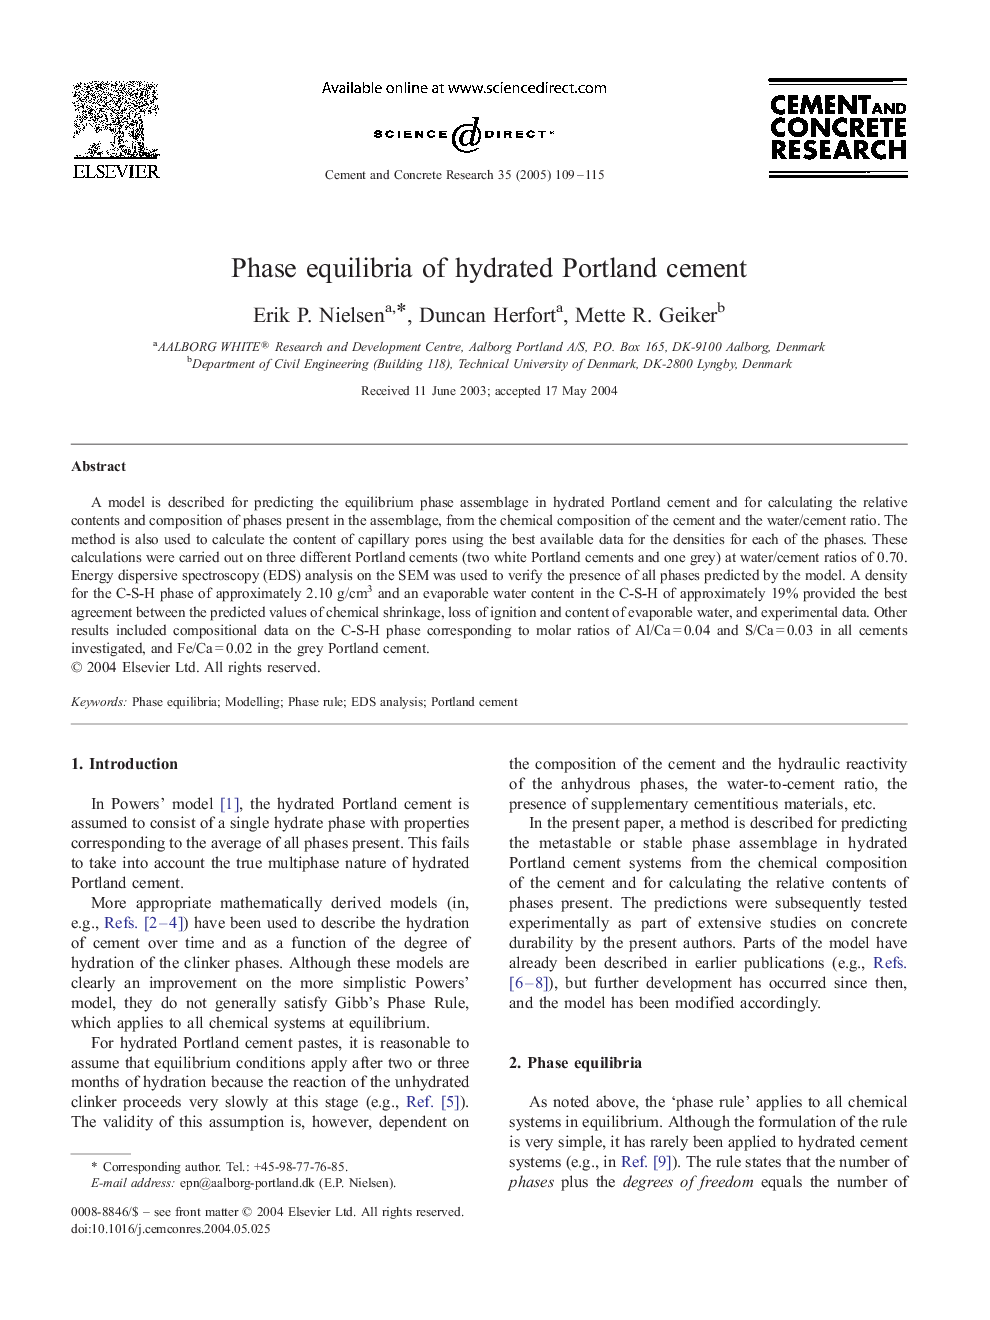 Phase equilibria of hydrated Portland cement